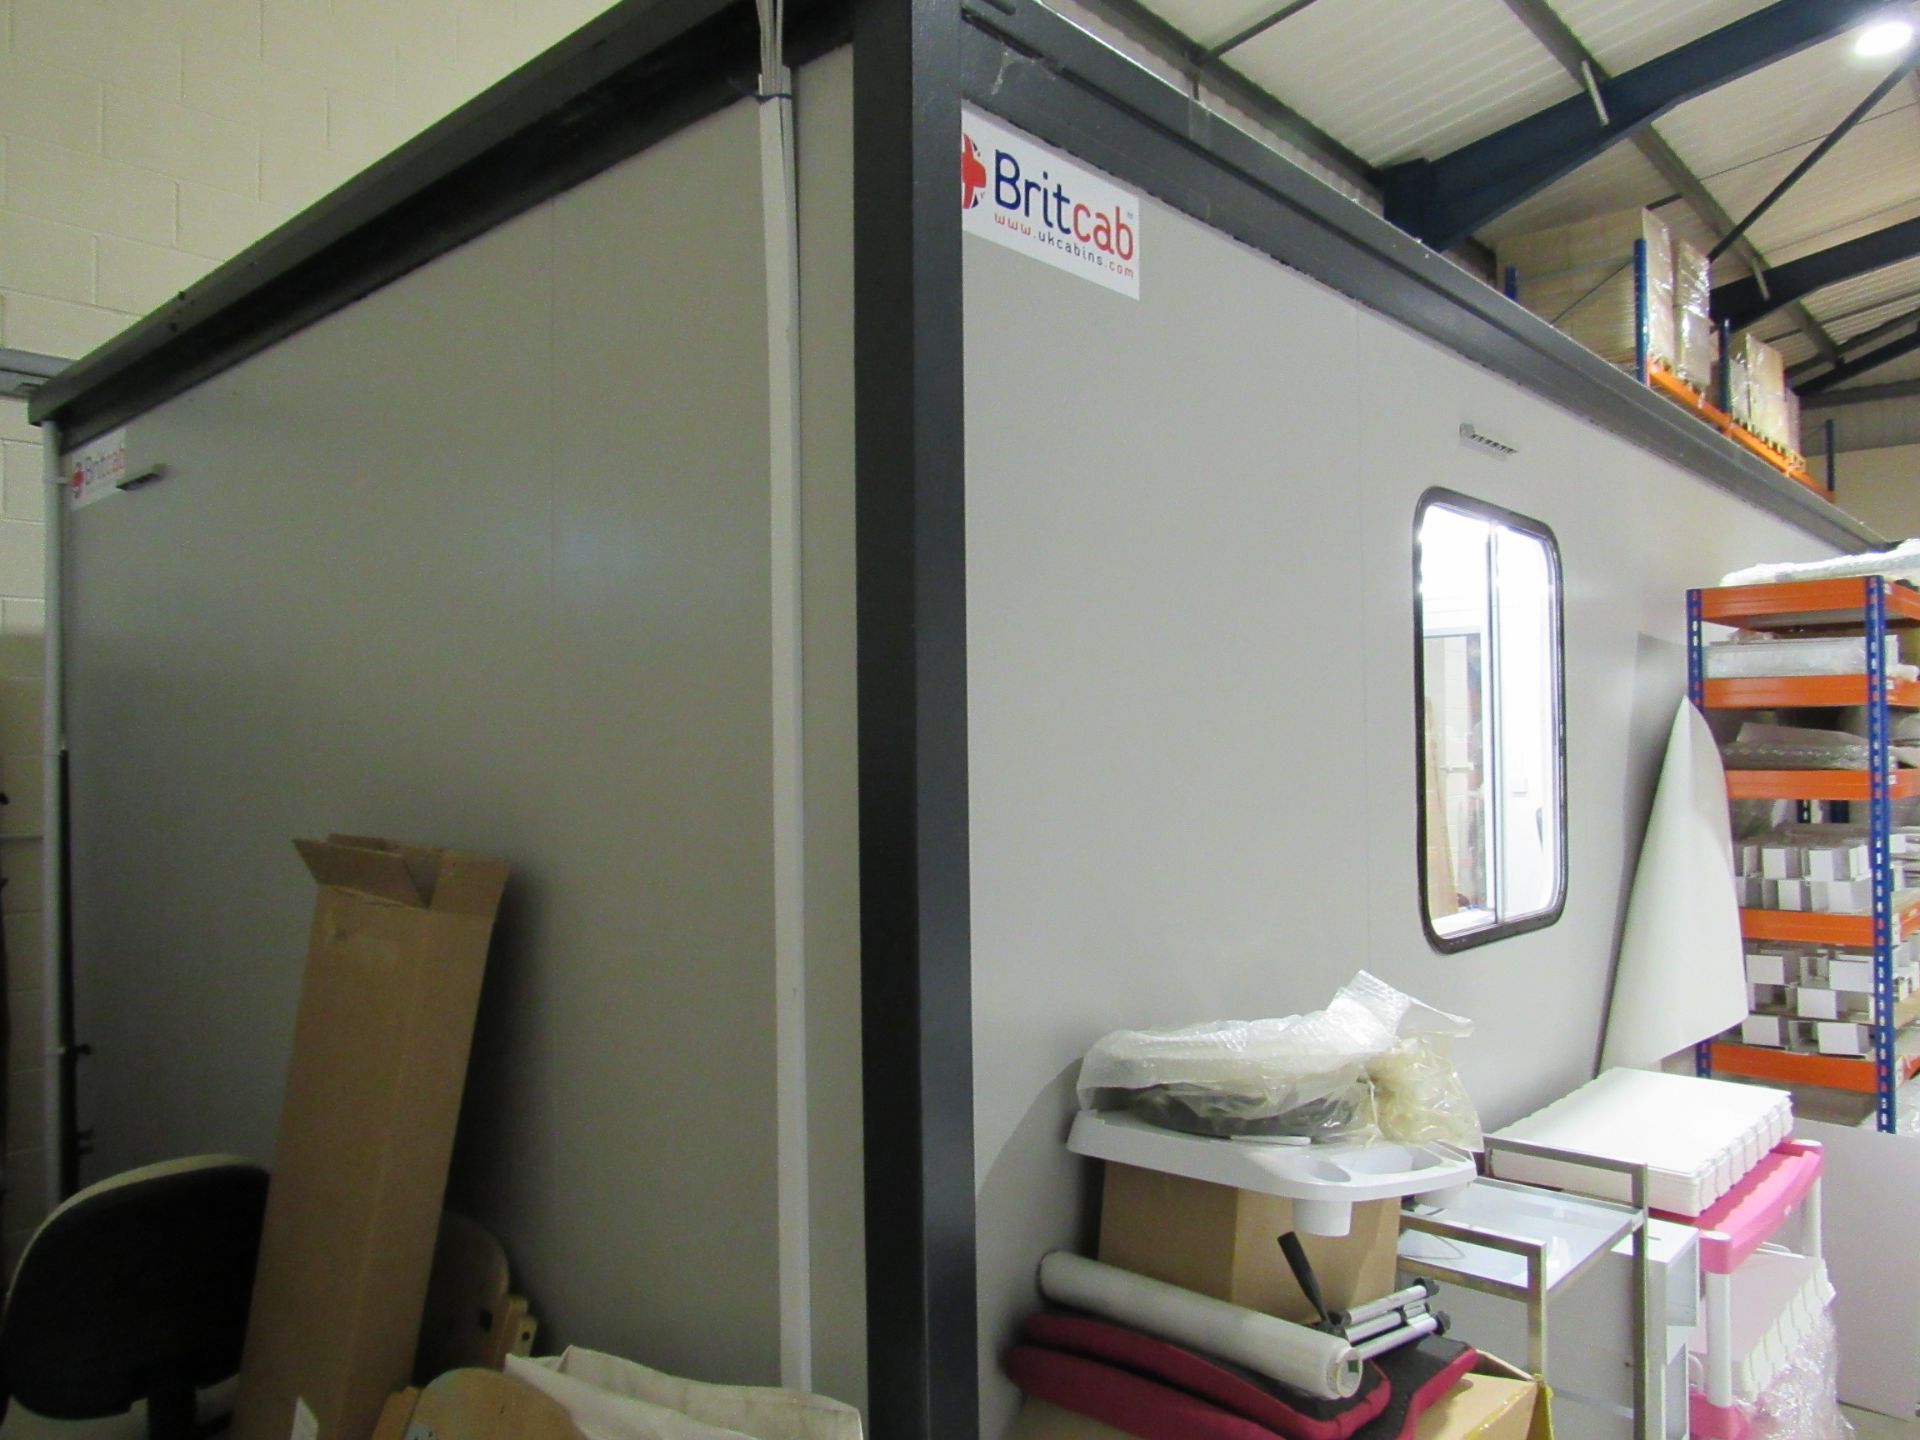 Britcab Portcabin Office, internal approx. 7.5m x - Image 9 of 15